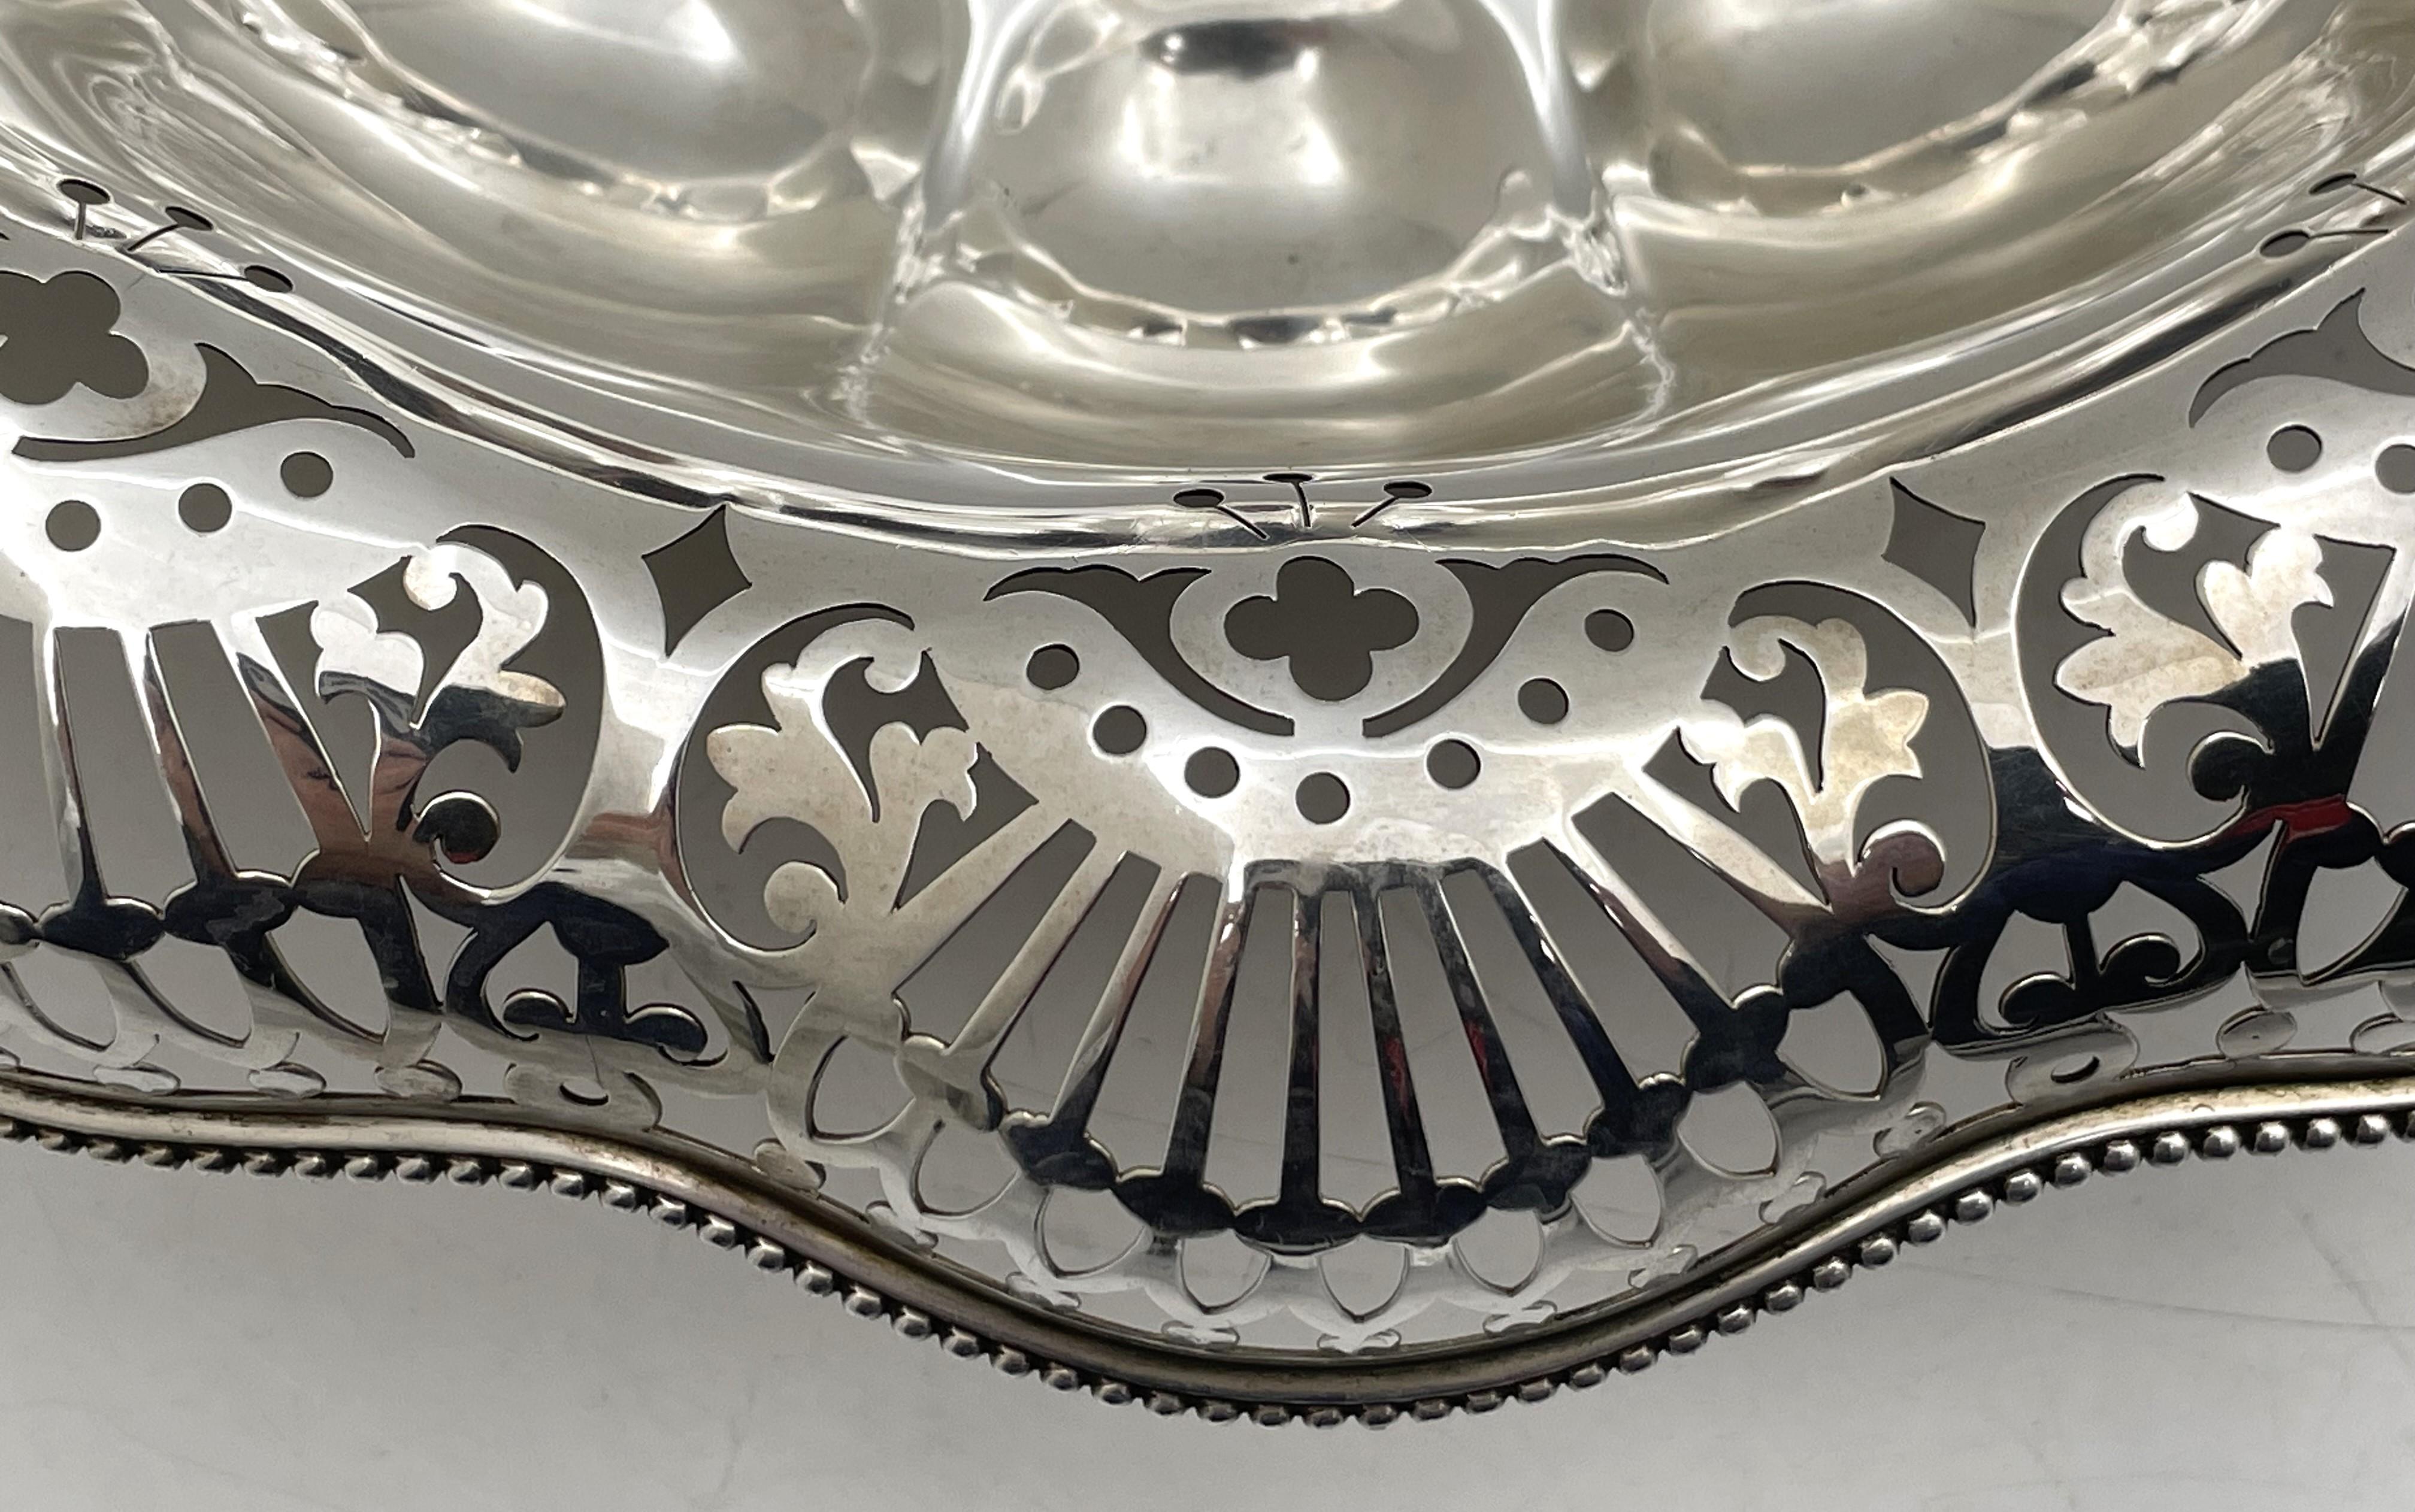 Dominick & Haff Sterling Silver 1887 Multilobed Centerpiece Bowl Pierced Motifs In Good Condition For Sale In New York, NY